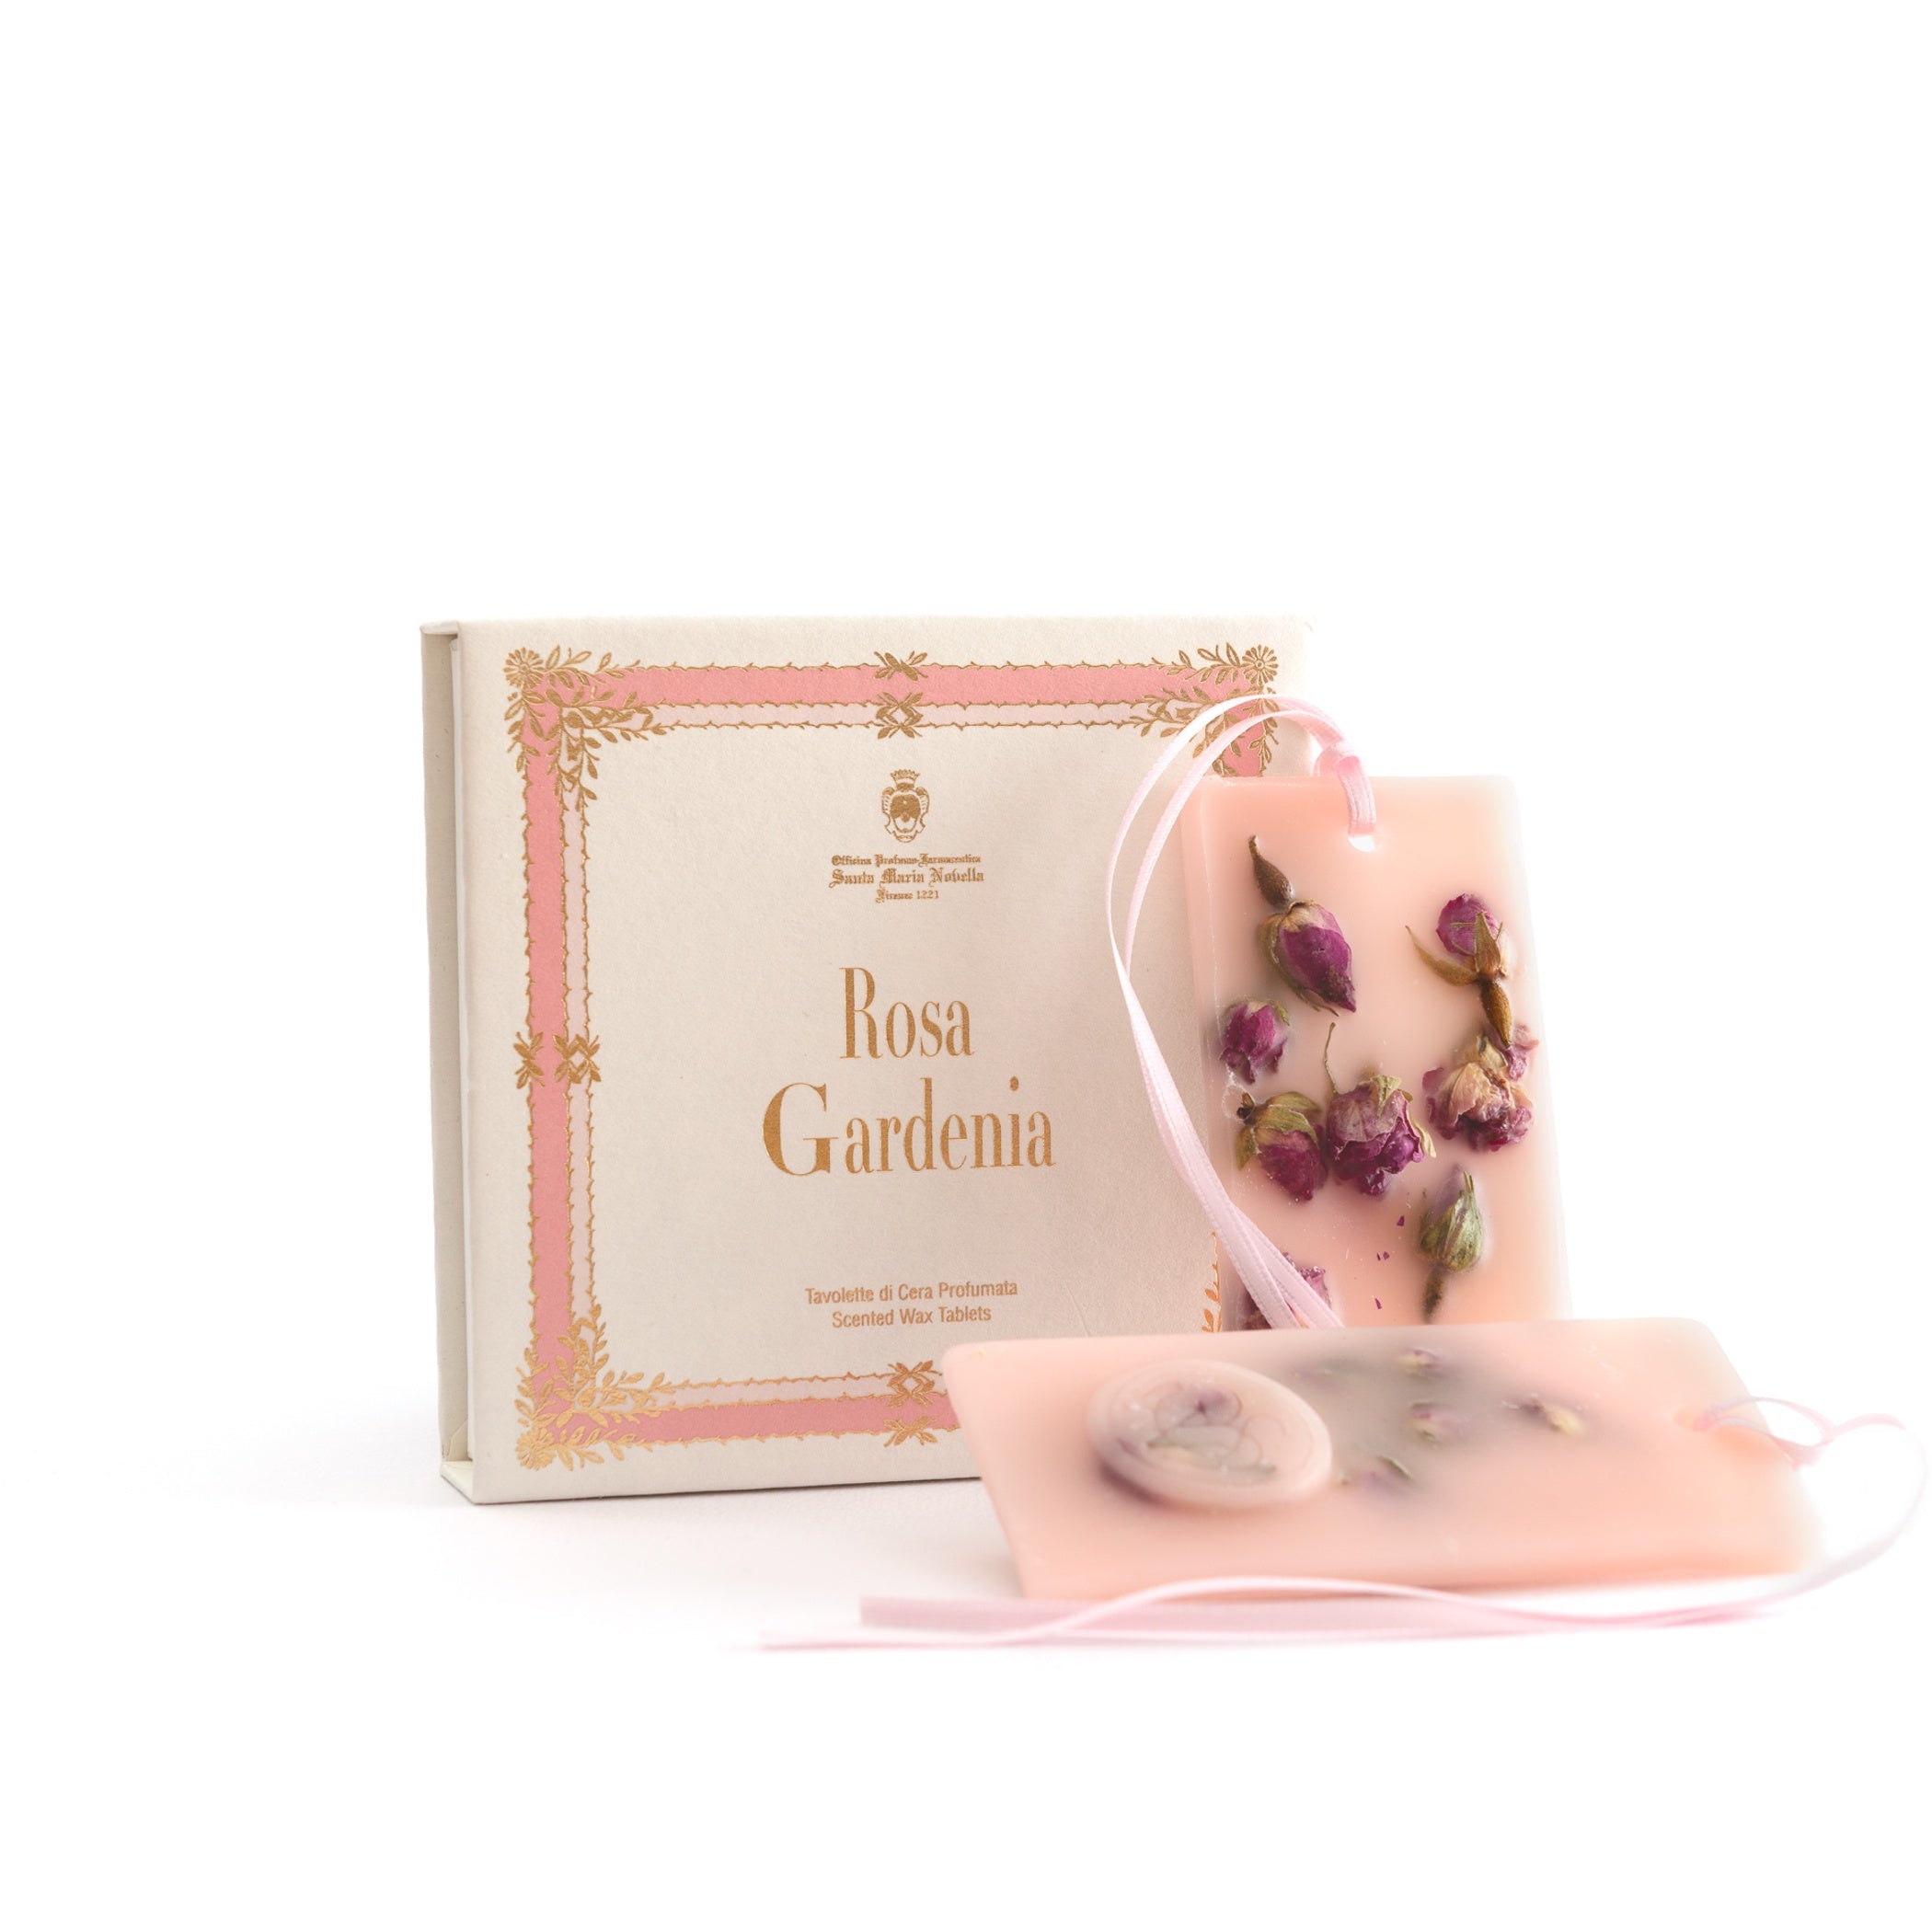 Rosa Gardenia Scented Wax Tablets. Box of 2.